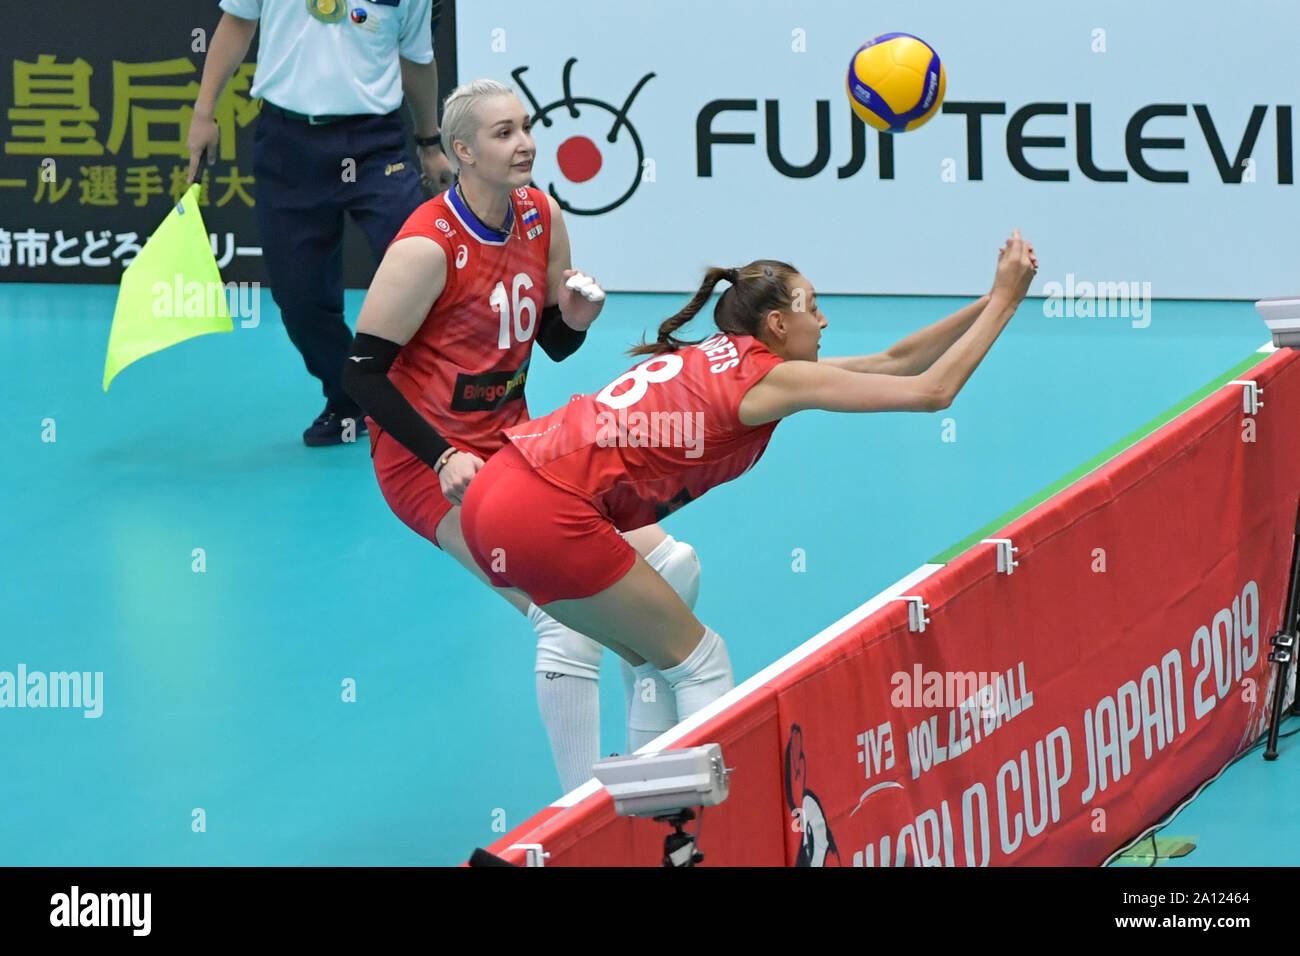 Toyama, Japan. 23rd Sep, 2019. Kseniia Parubets (R) of Russia competes during the Round Robin match between Russia and Argentina at the 2019 FIVB Women's World Cup in Toyama, Japan, Sept. 23, 2019. Credit: Zhu Wei/Xinhua/Alamy Live News Stock Photo